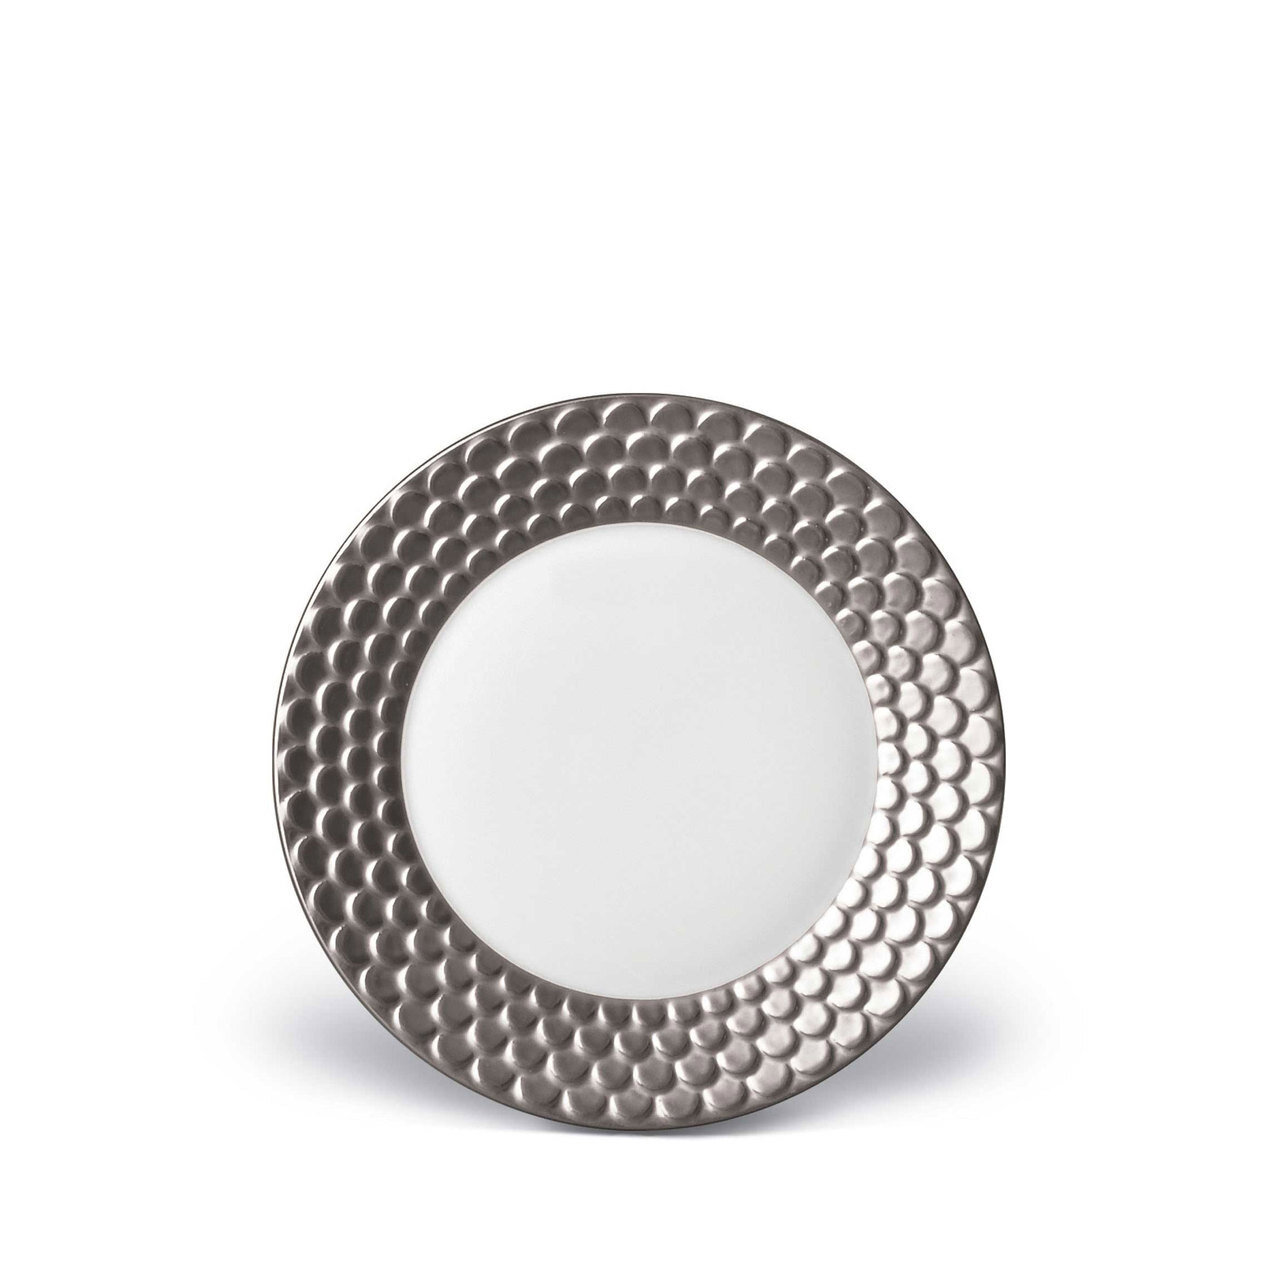 L'Objet Aegean Bread and Butter Plate Platinum